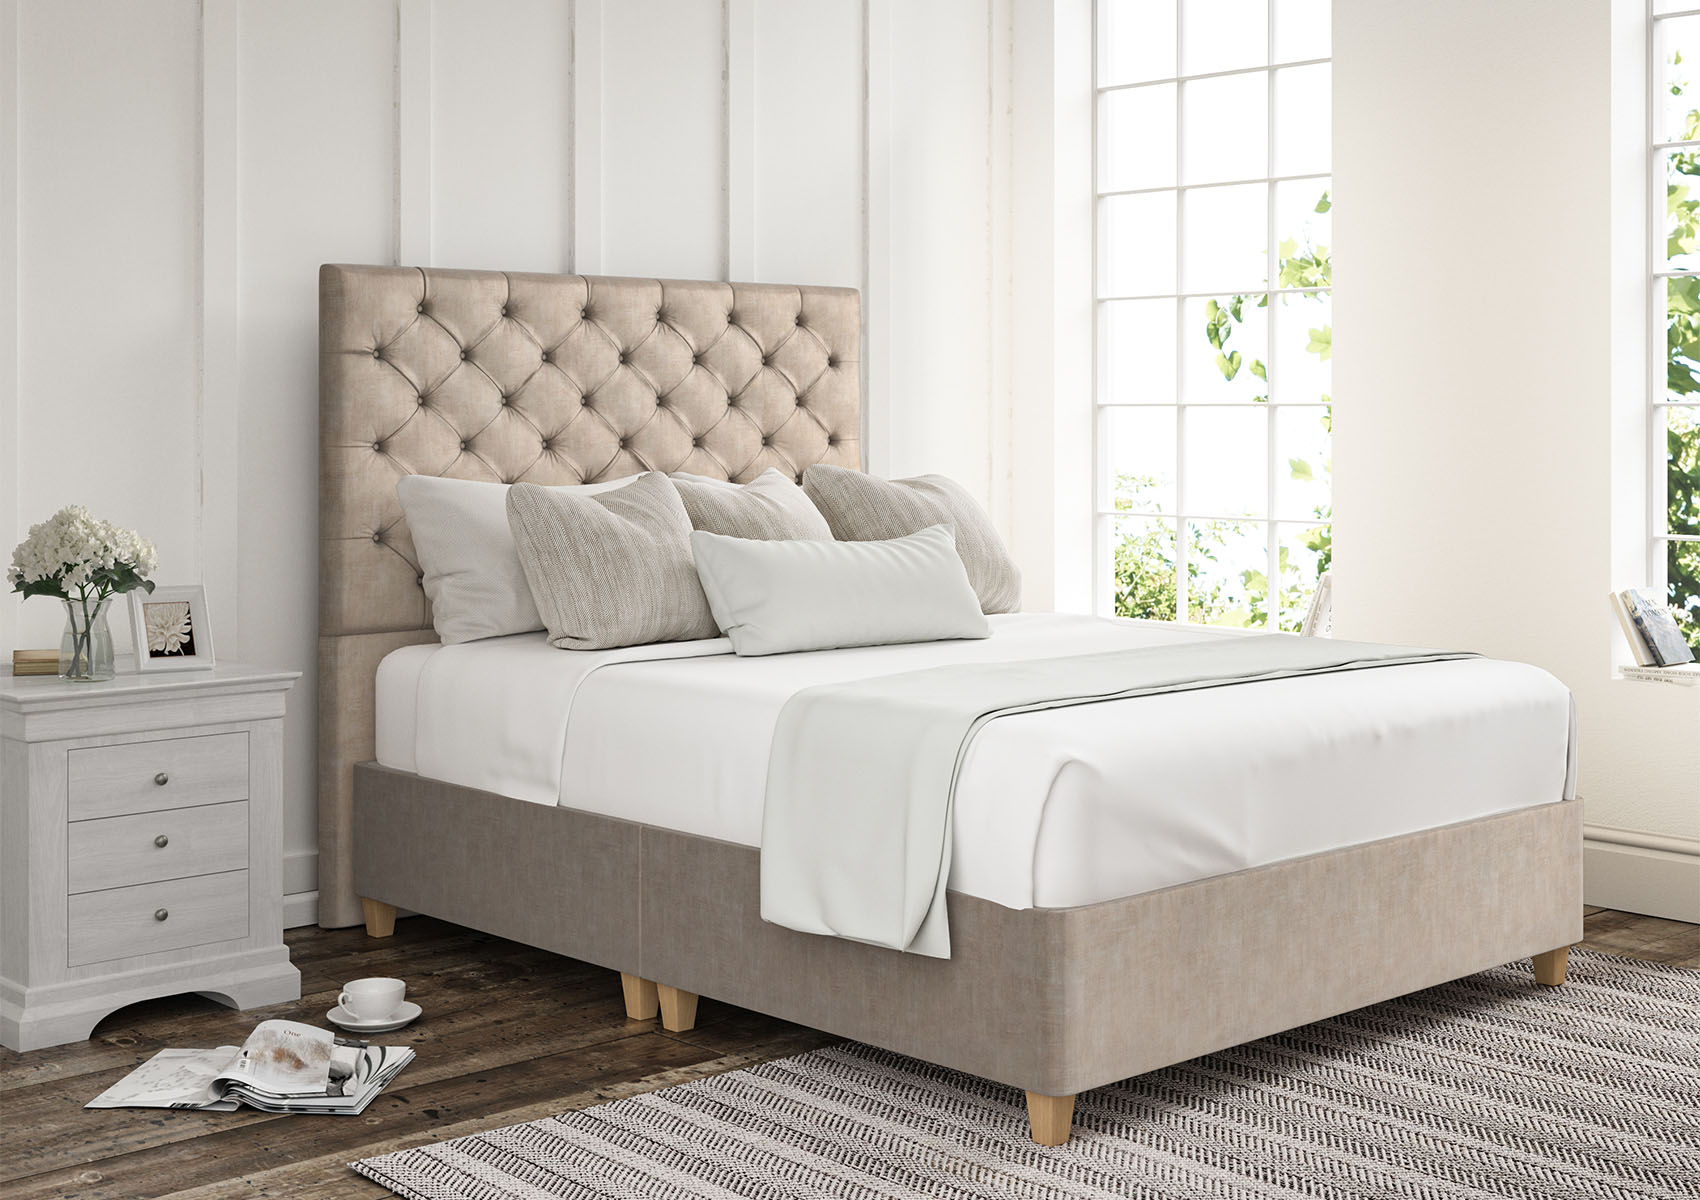 View Chesterfield Arlington Ice Upholstered Double Divan Bed Time4Sleep information